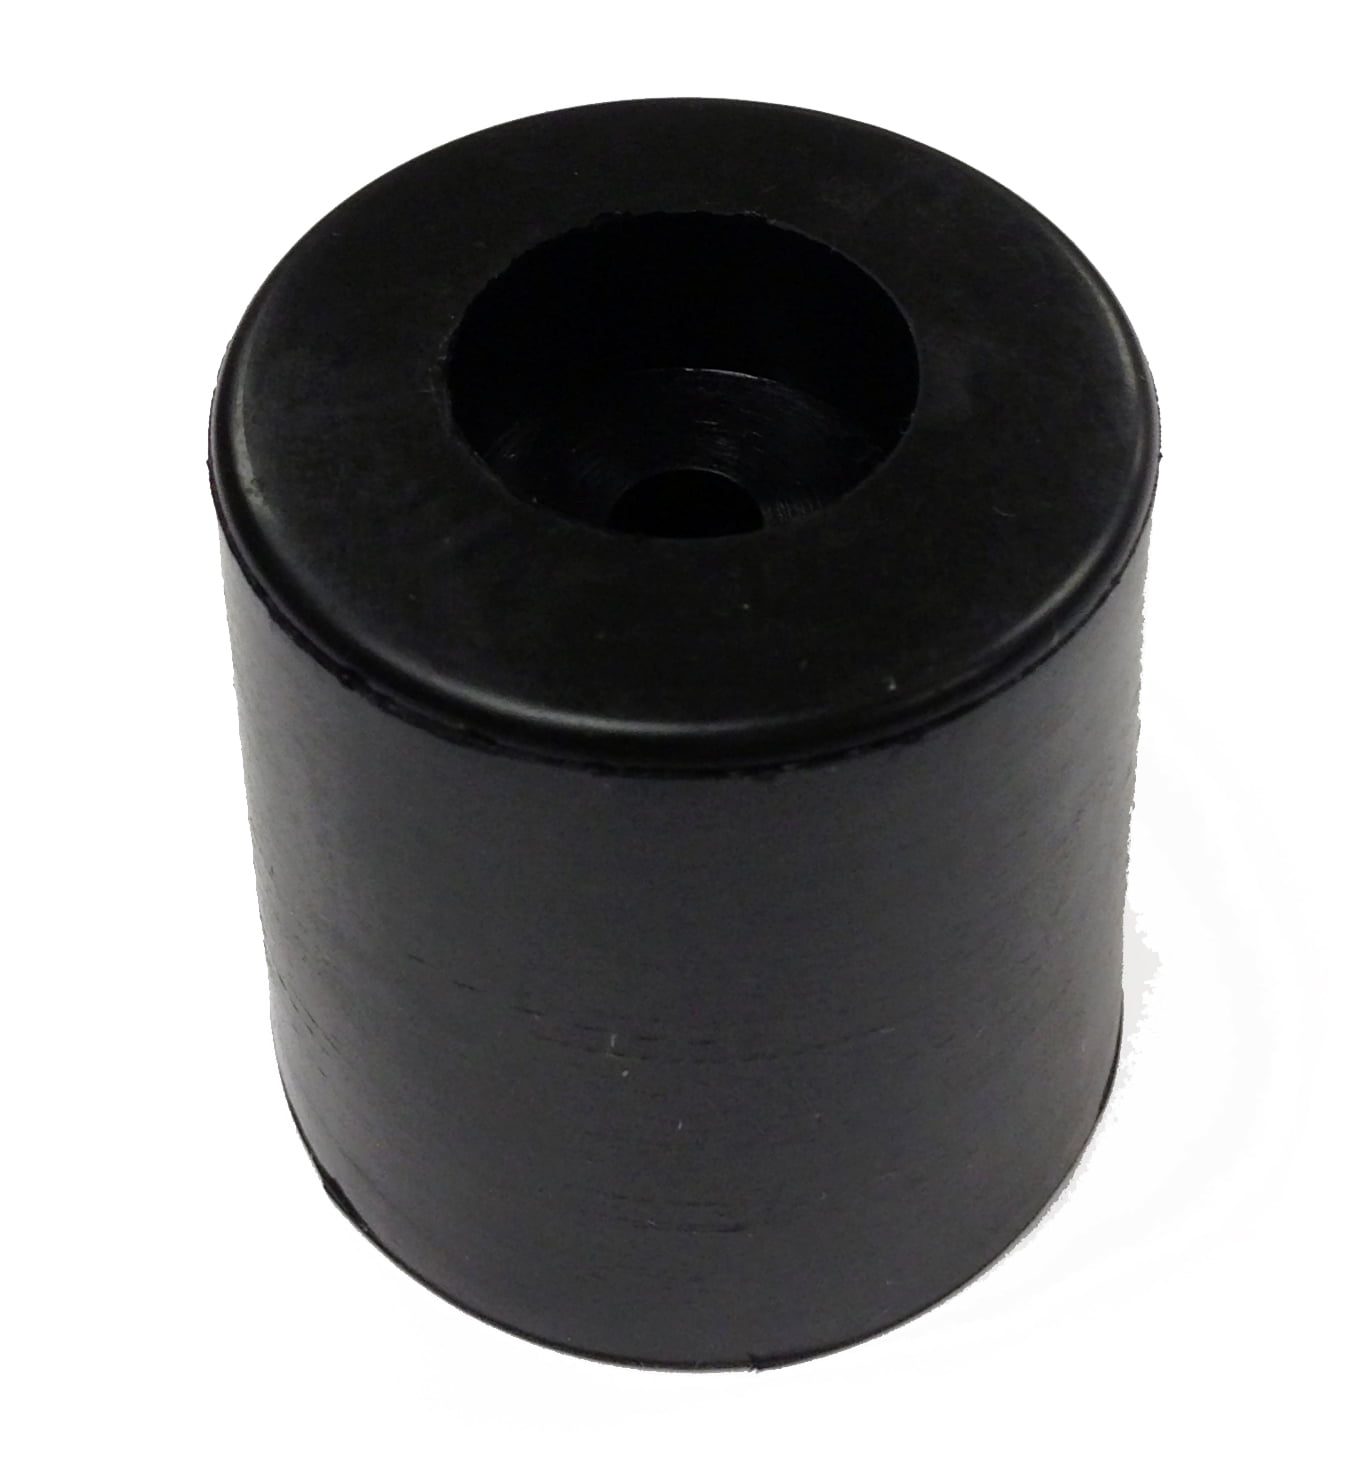 Herco D-3 Extruded Rubber Bumper 10 Ft - Drilled 